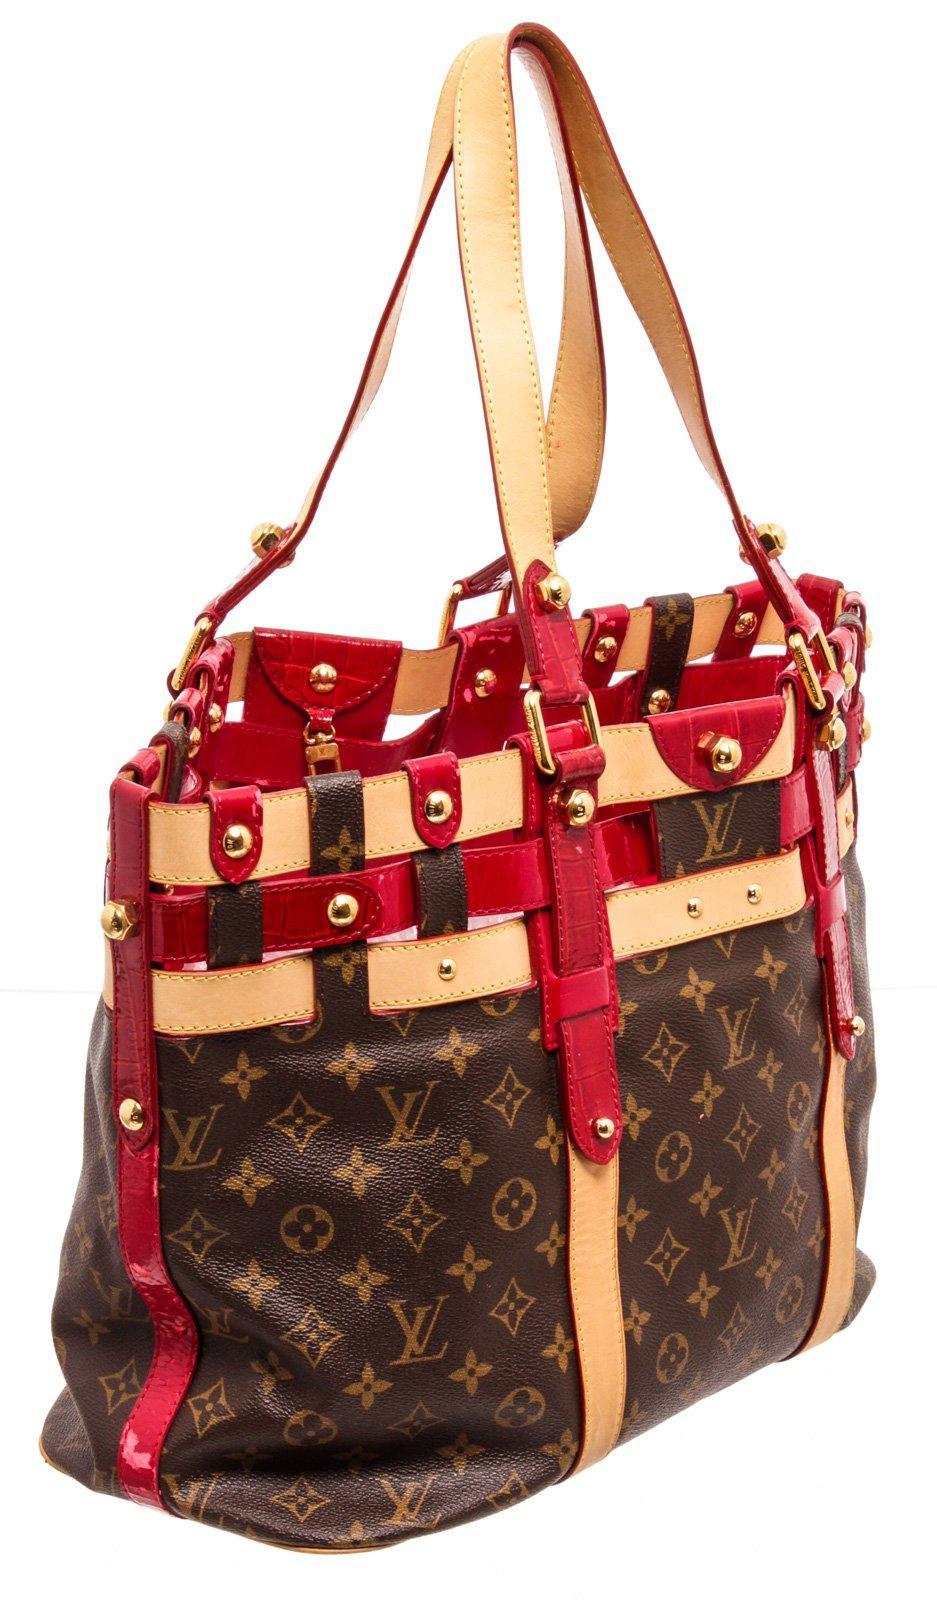 Louis Vuitton Canvas Leather Monogram Rubis Salina Tote Bag In Good Condition For Sale In Irvine, CA